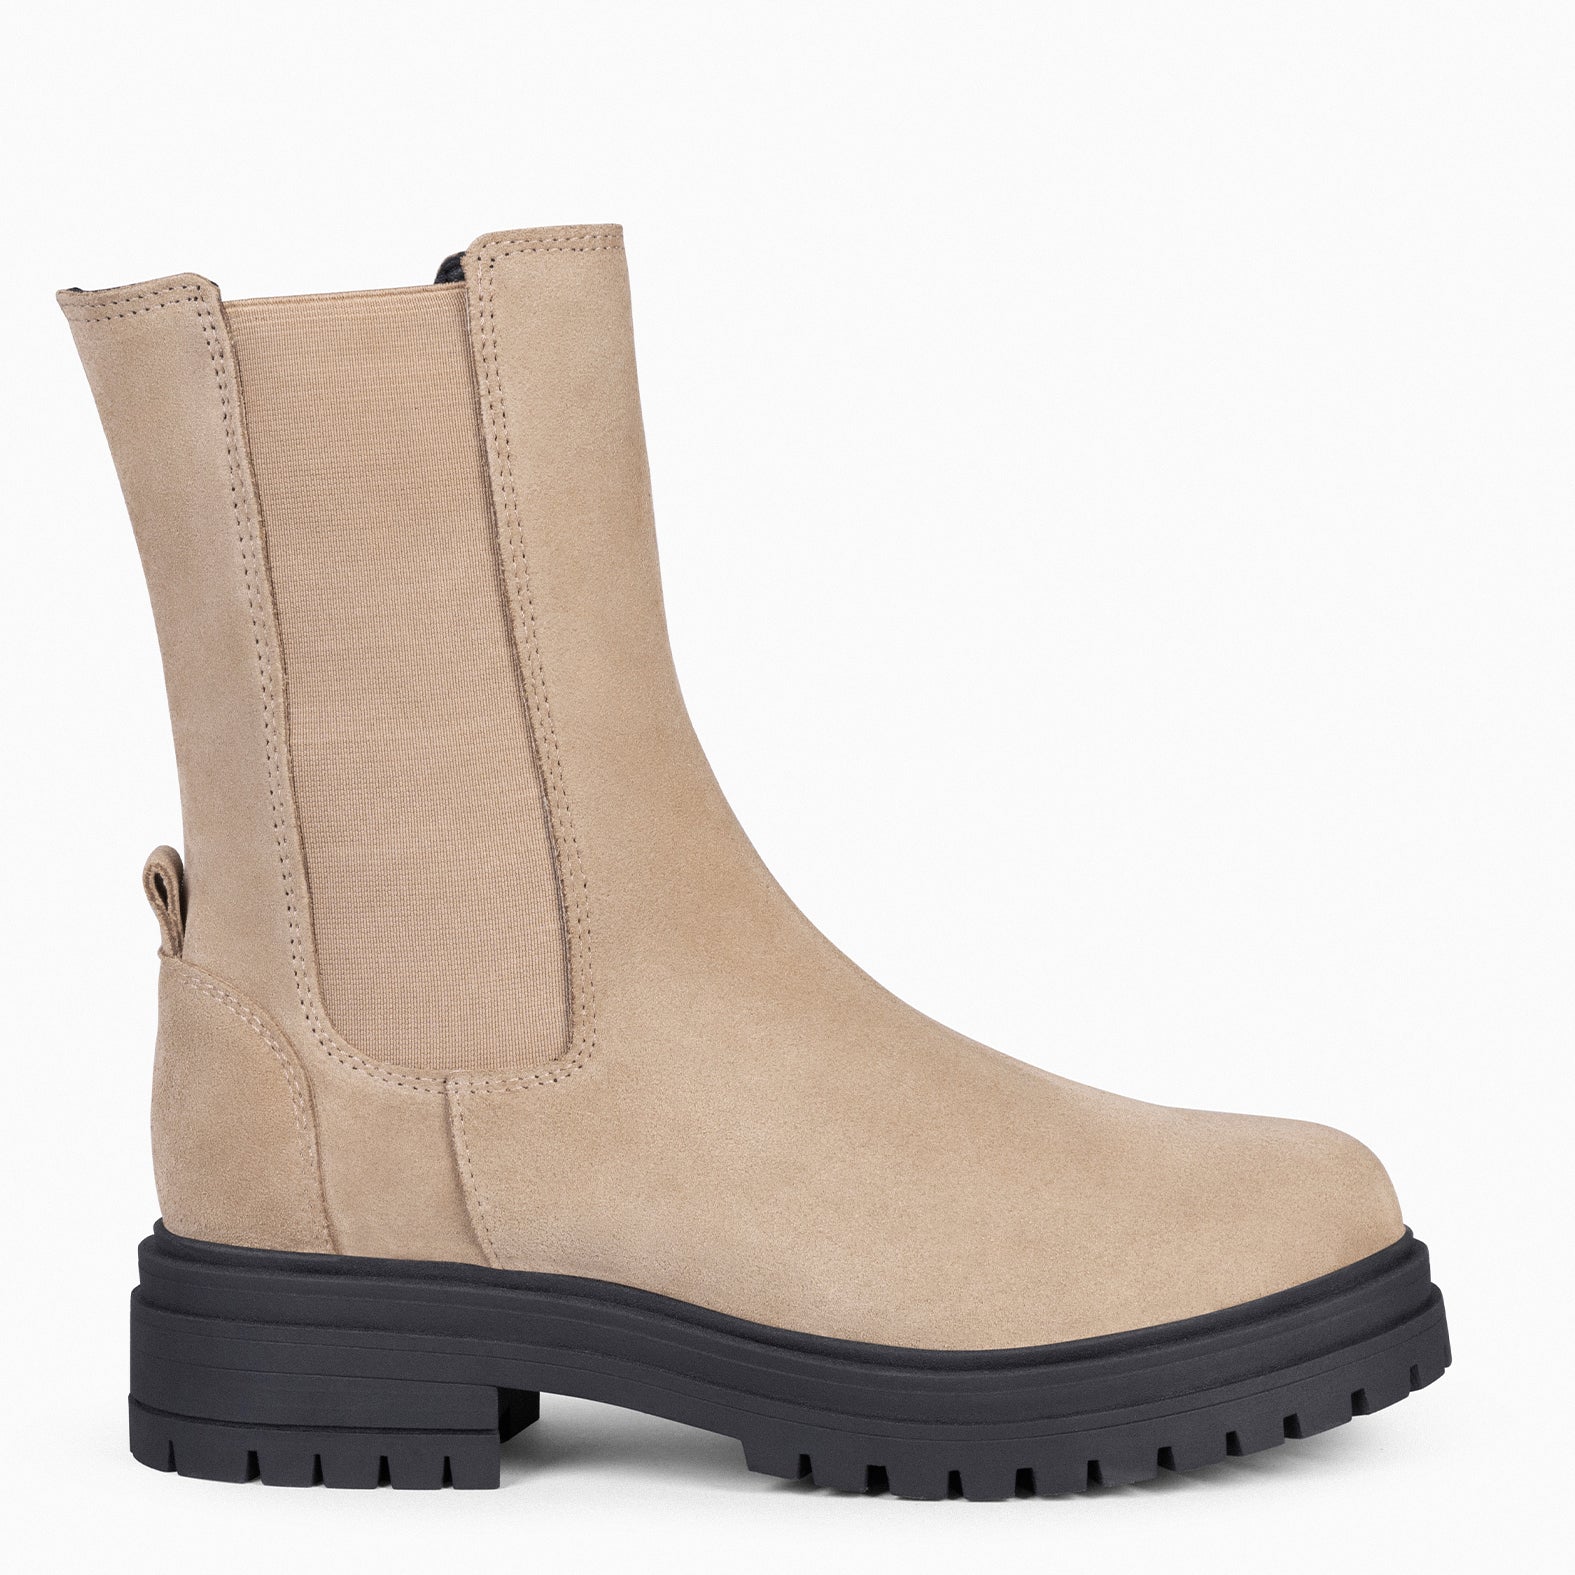 STANFORD – BEIGE Chelsea Boots with Track Platform